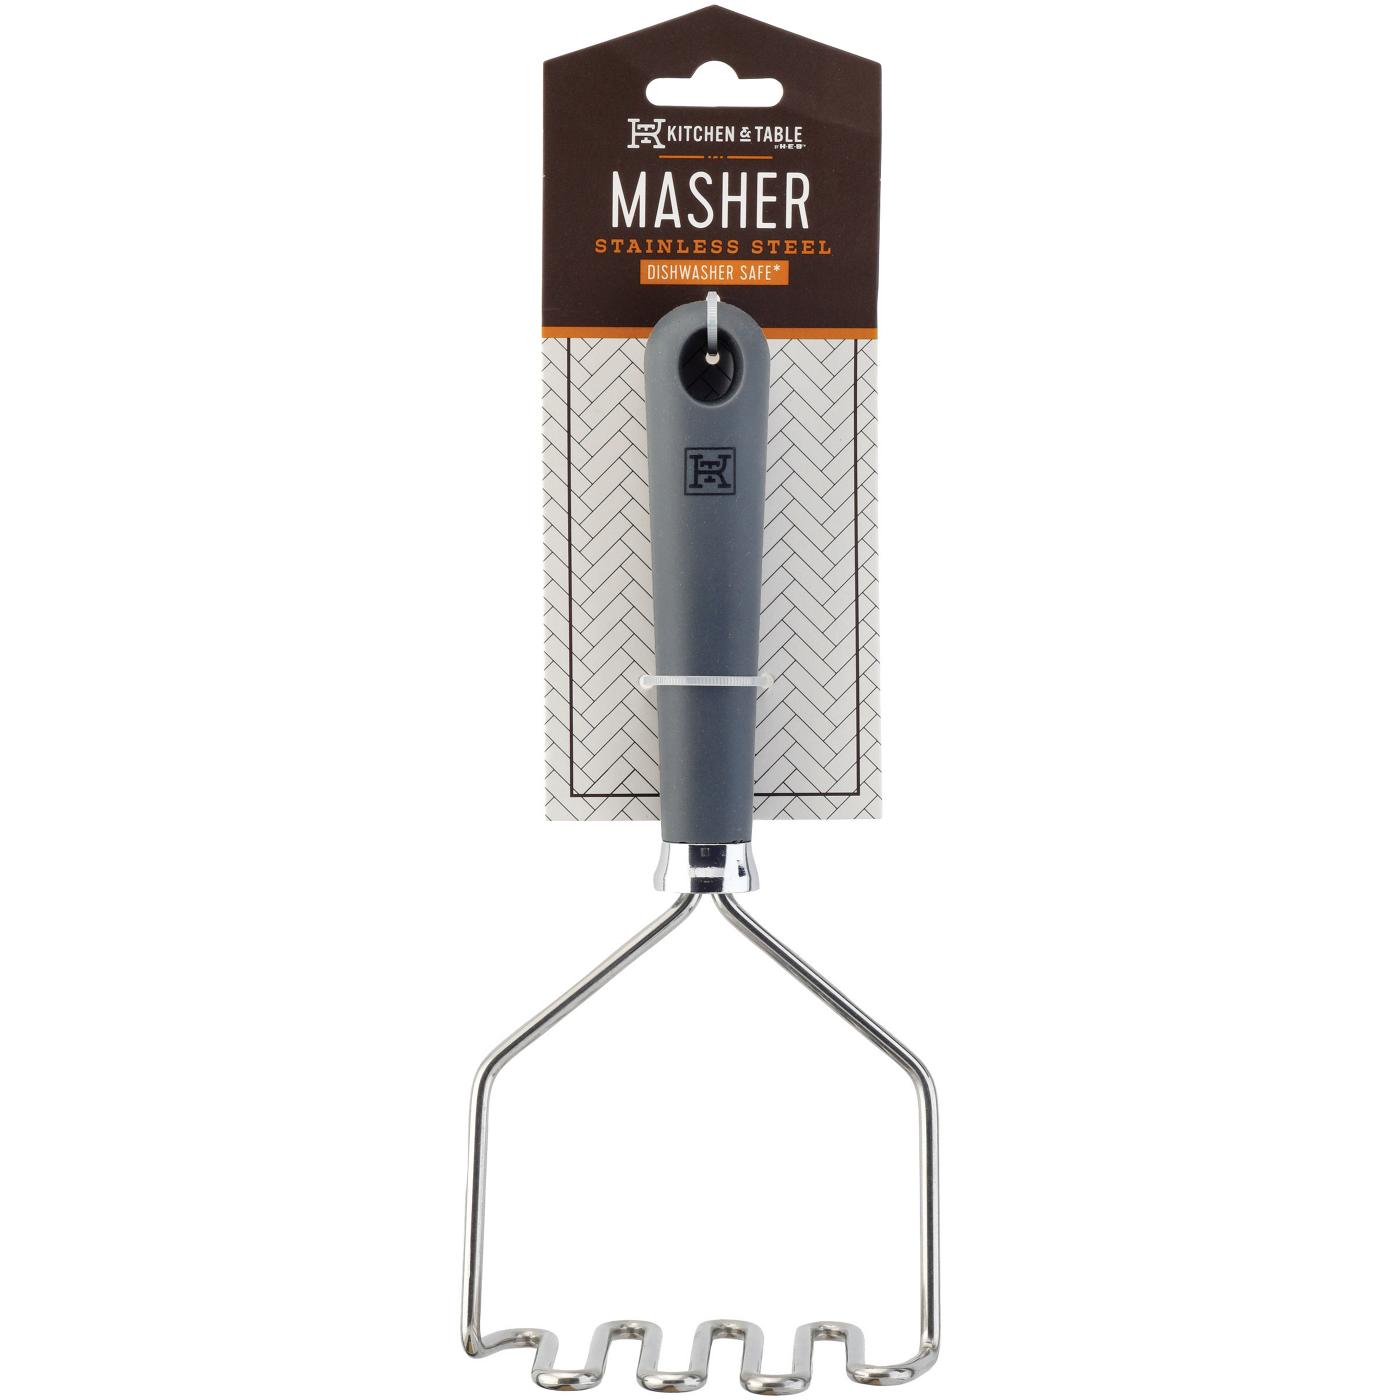 Kitchen & Table by H-E-B Stainless Steel Masher; image 1 of 2